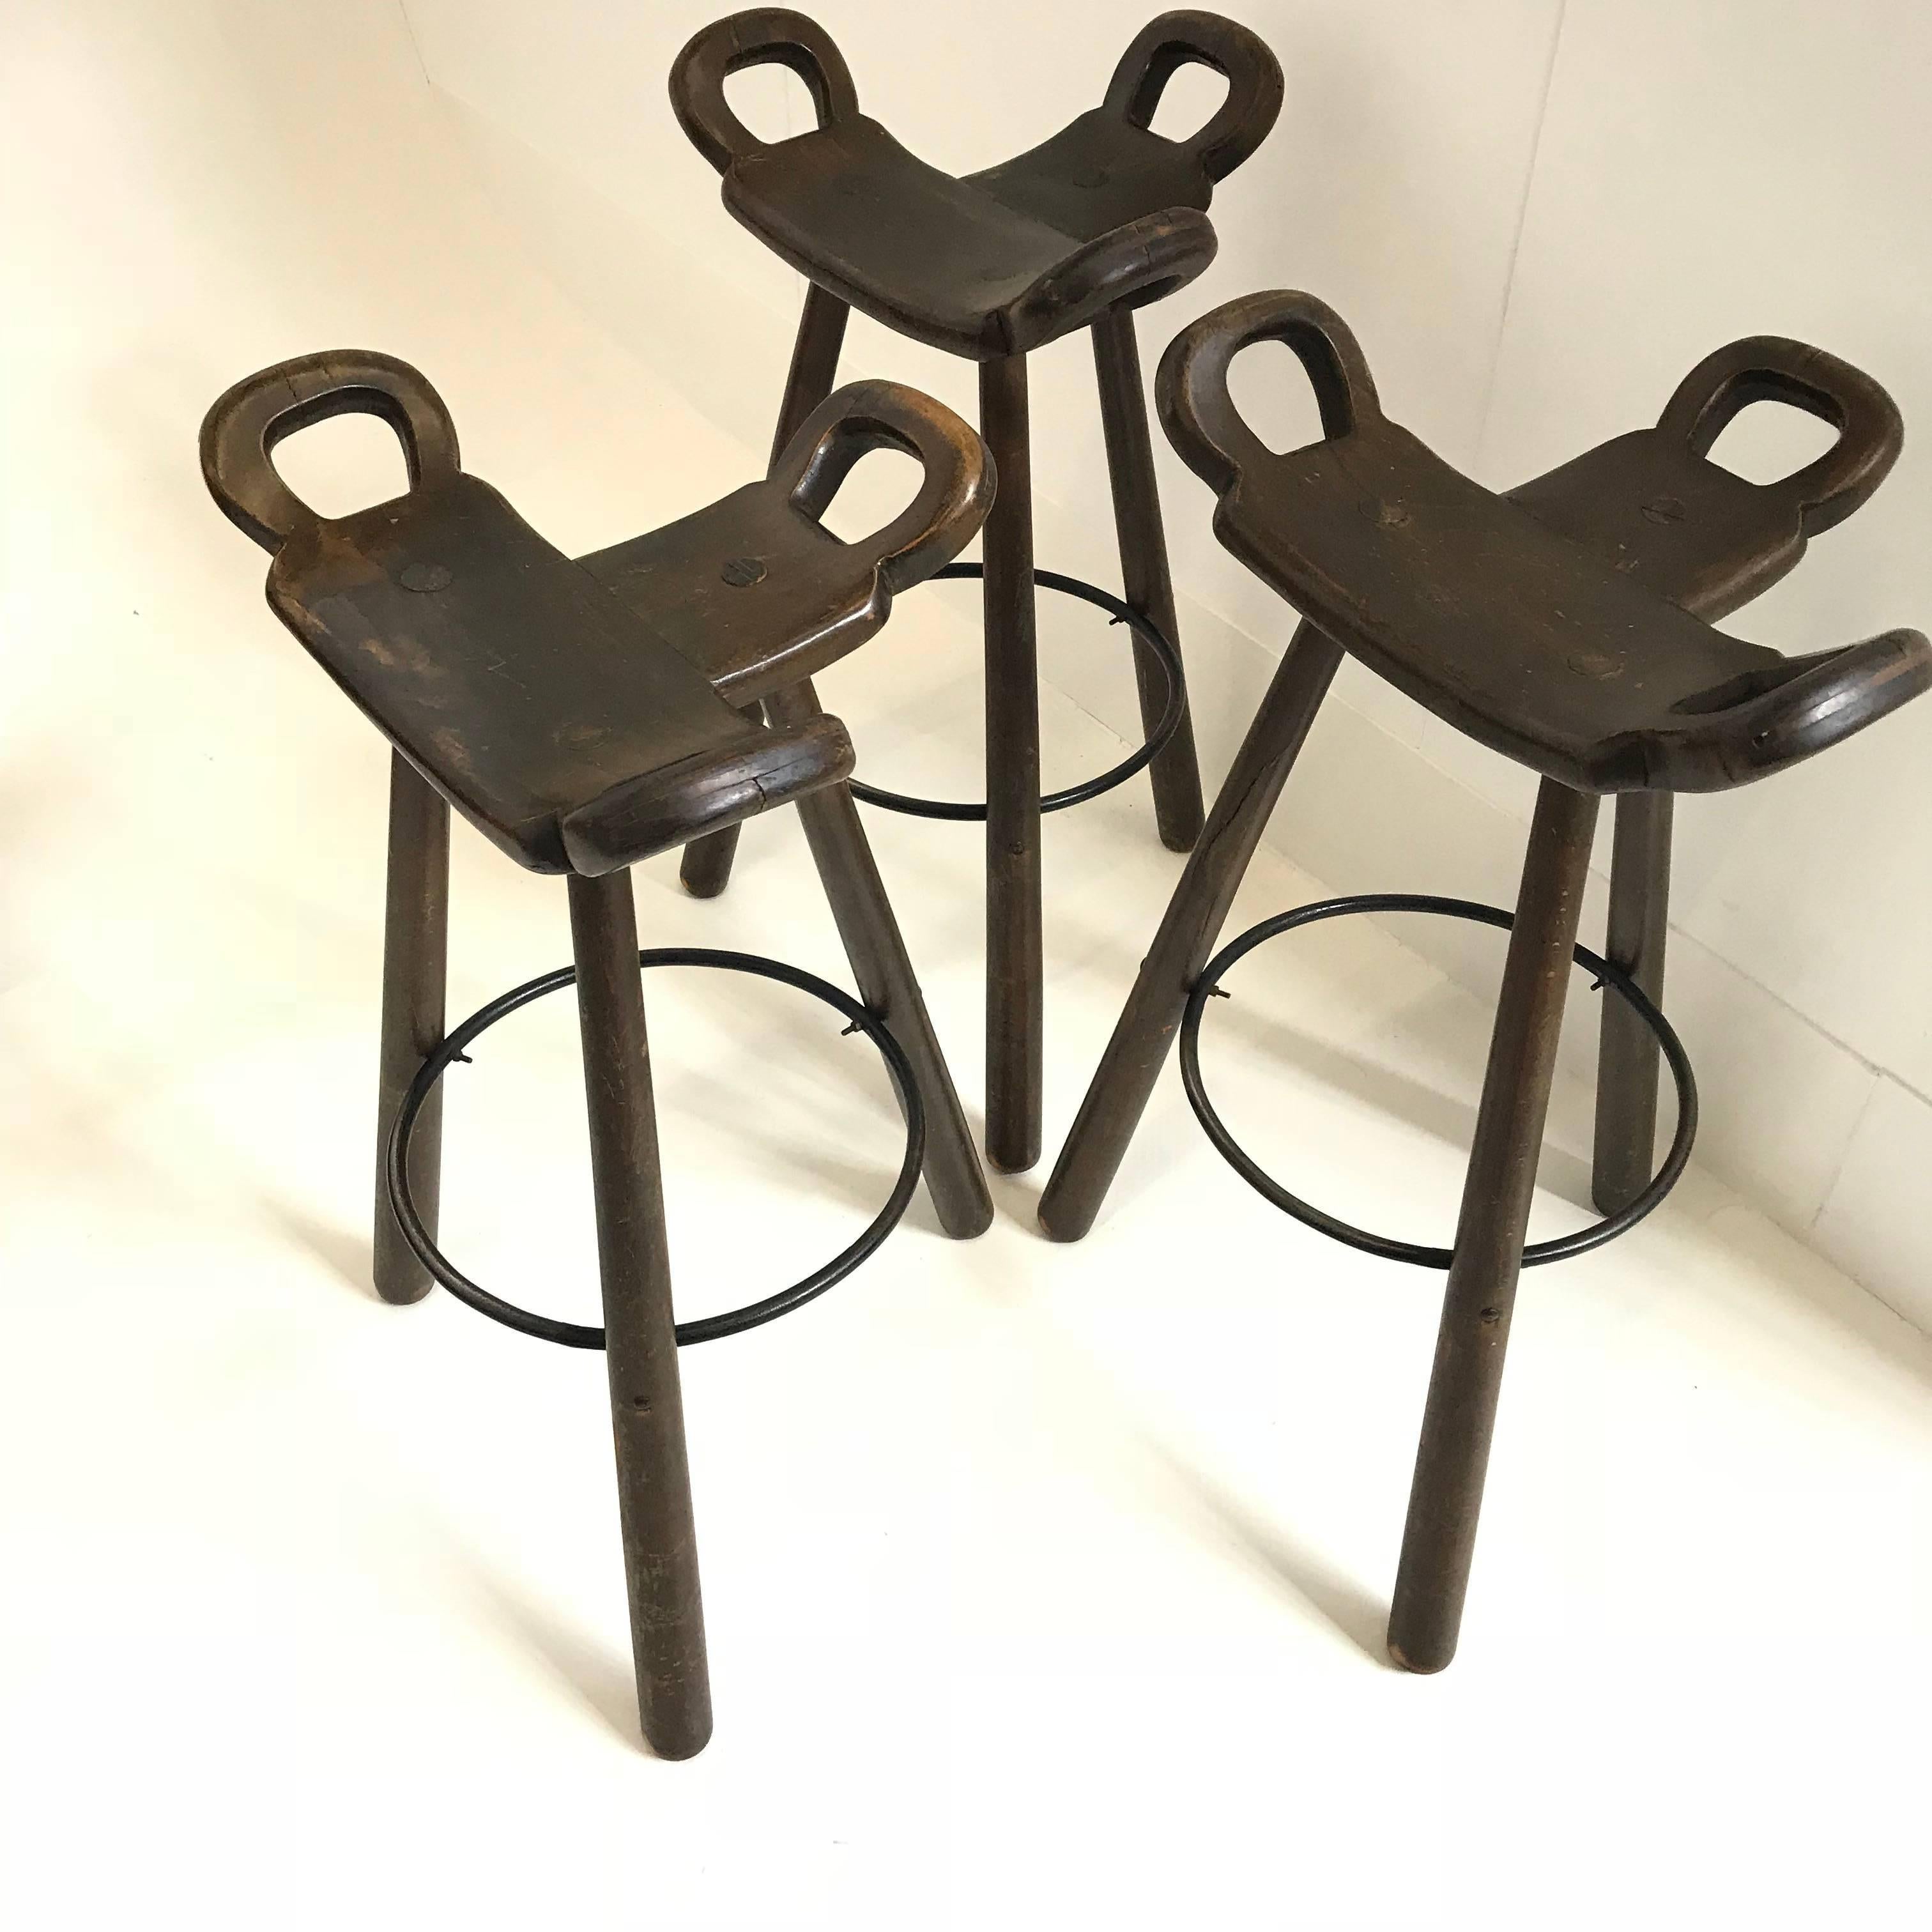 Set of three 'Brutalist' or 'Marbella' bar stools, in stained beech and metal, Spain, 1970s. A curved T-shape with three handles. The curved form makes sure the stool has a stabile seat, emphasized by the metal ring as footrest.
These bar stools